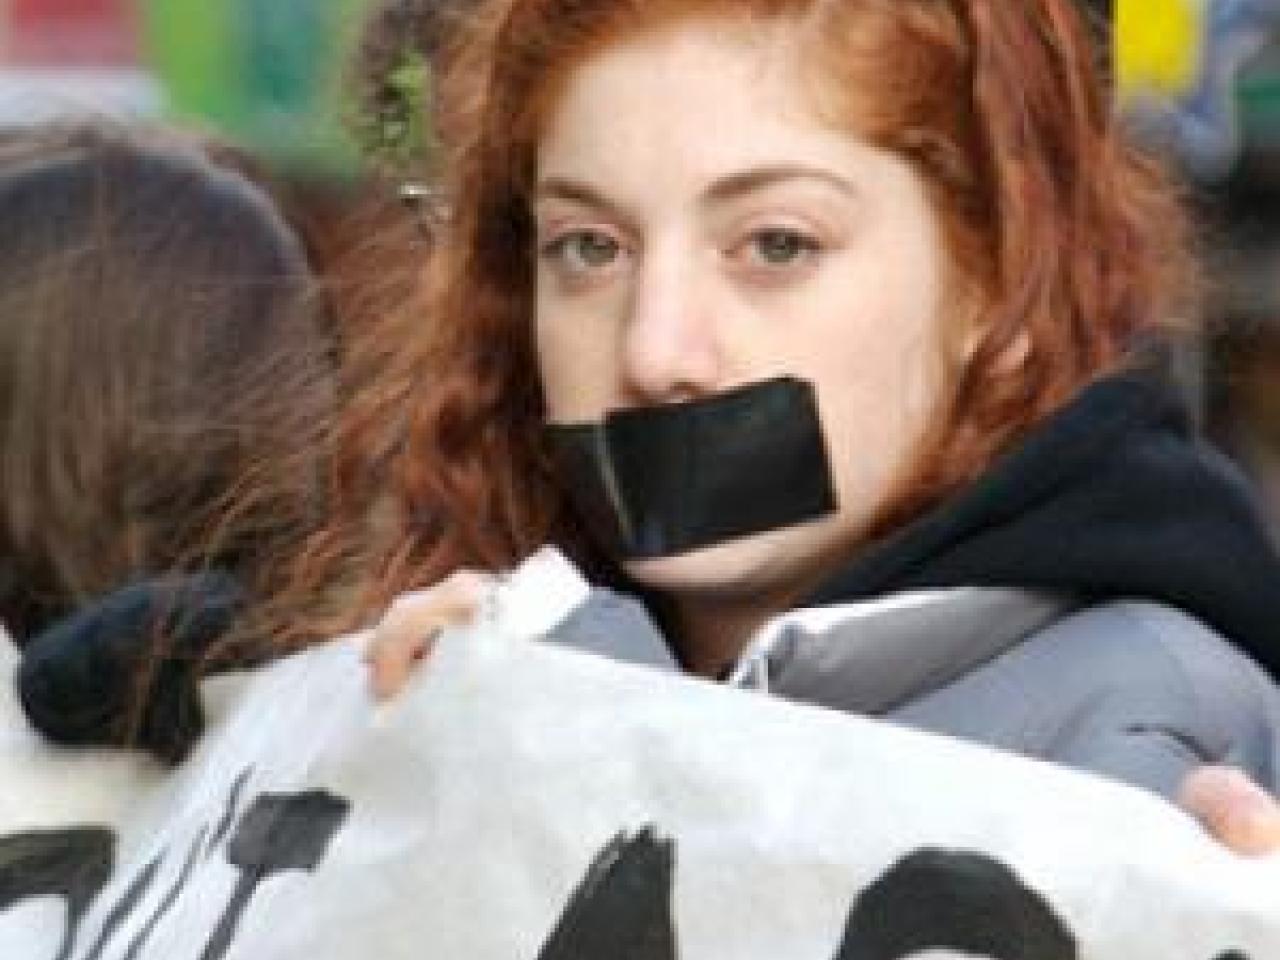 A young girl with red hair stares boldly into the camera in a protest. She has a large black strip of duct tape covering her mouth and she is holding up a protest banner. The other people holding up the banner are blurred in the background.